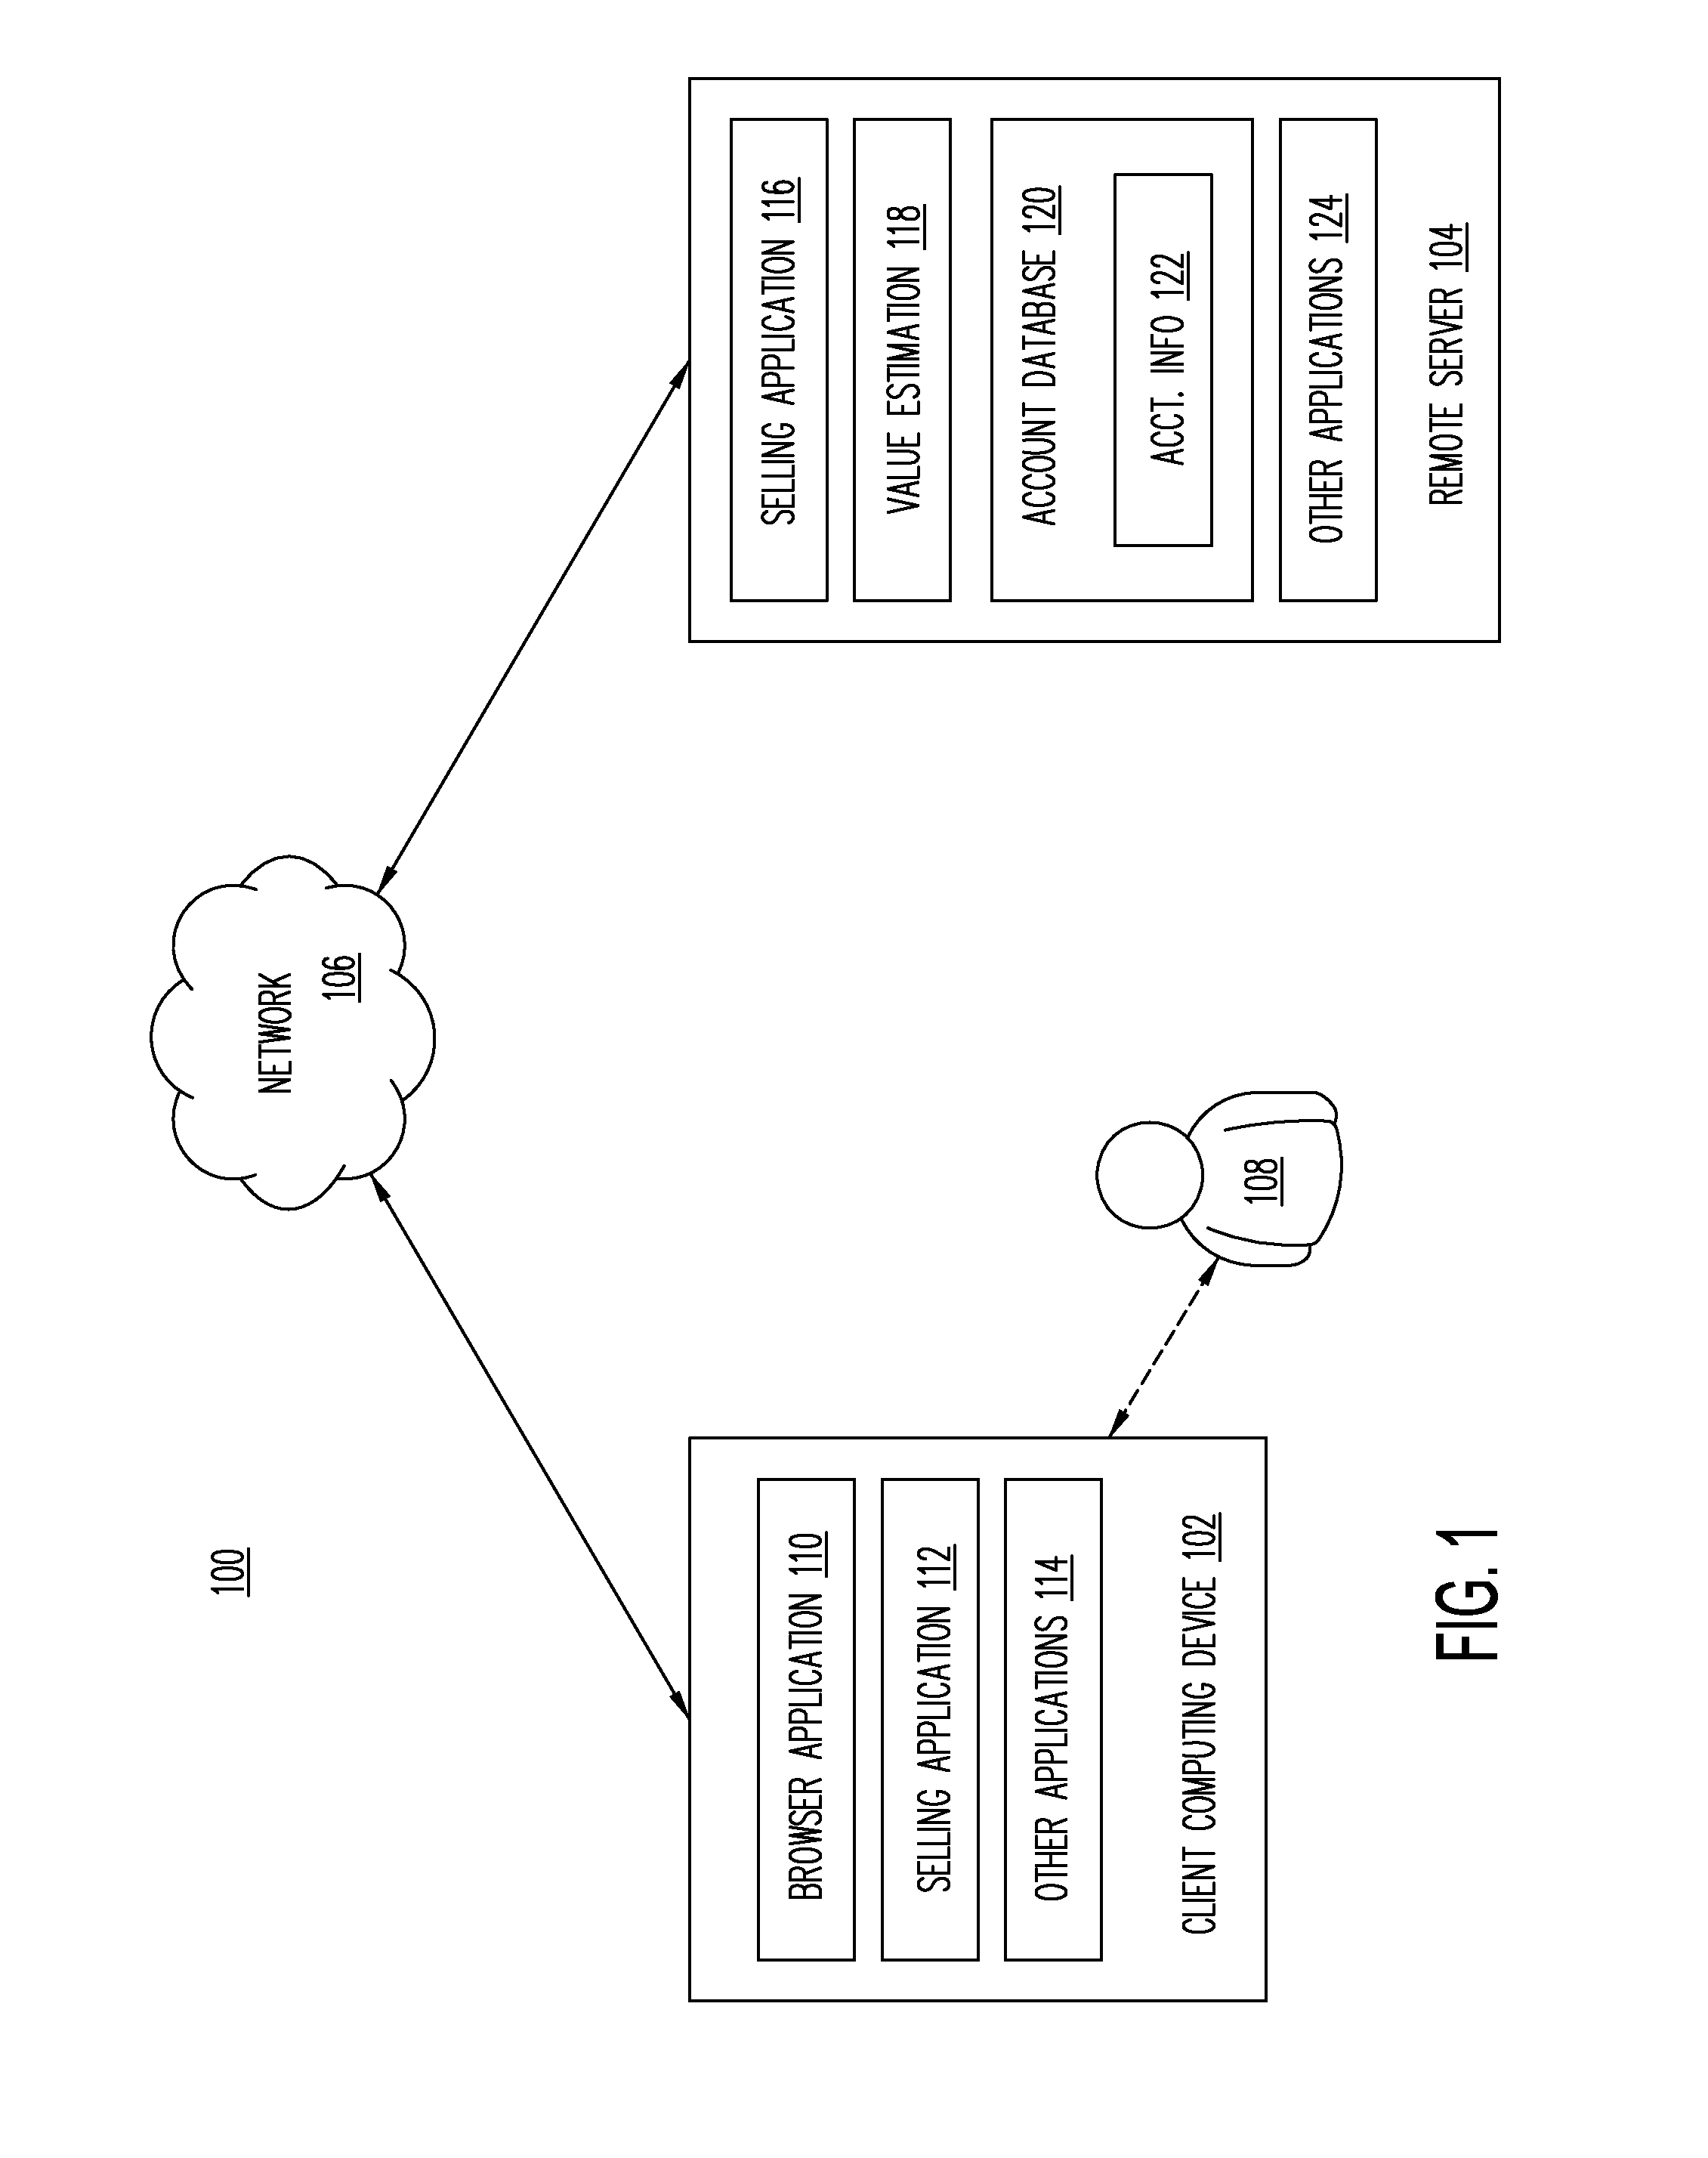 Systems and methods for providing selling assistance